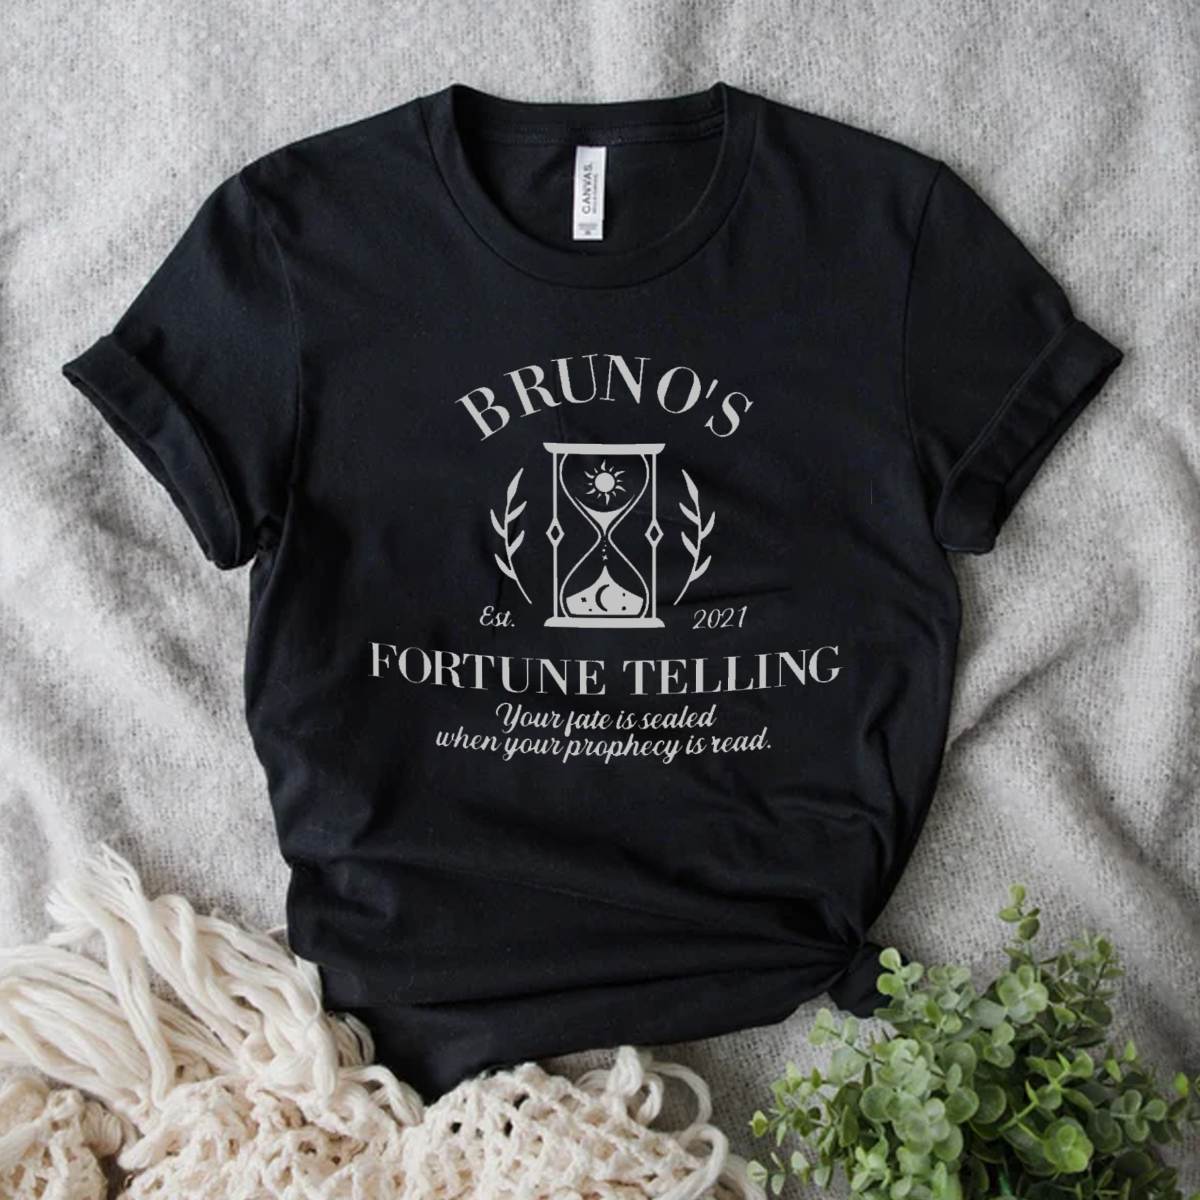 Bruno's Fortune Telling T-Shirt